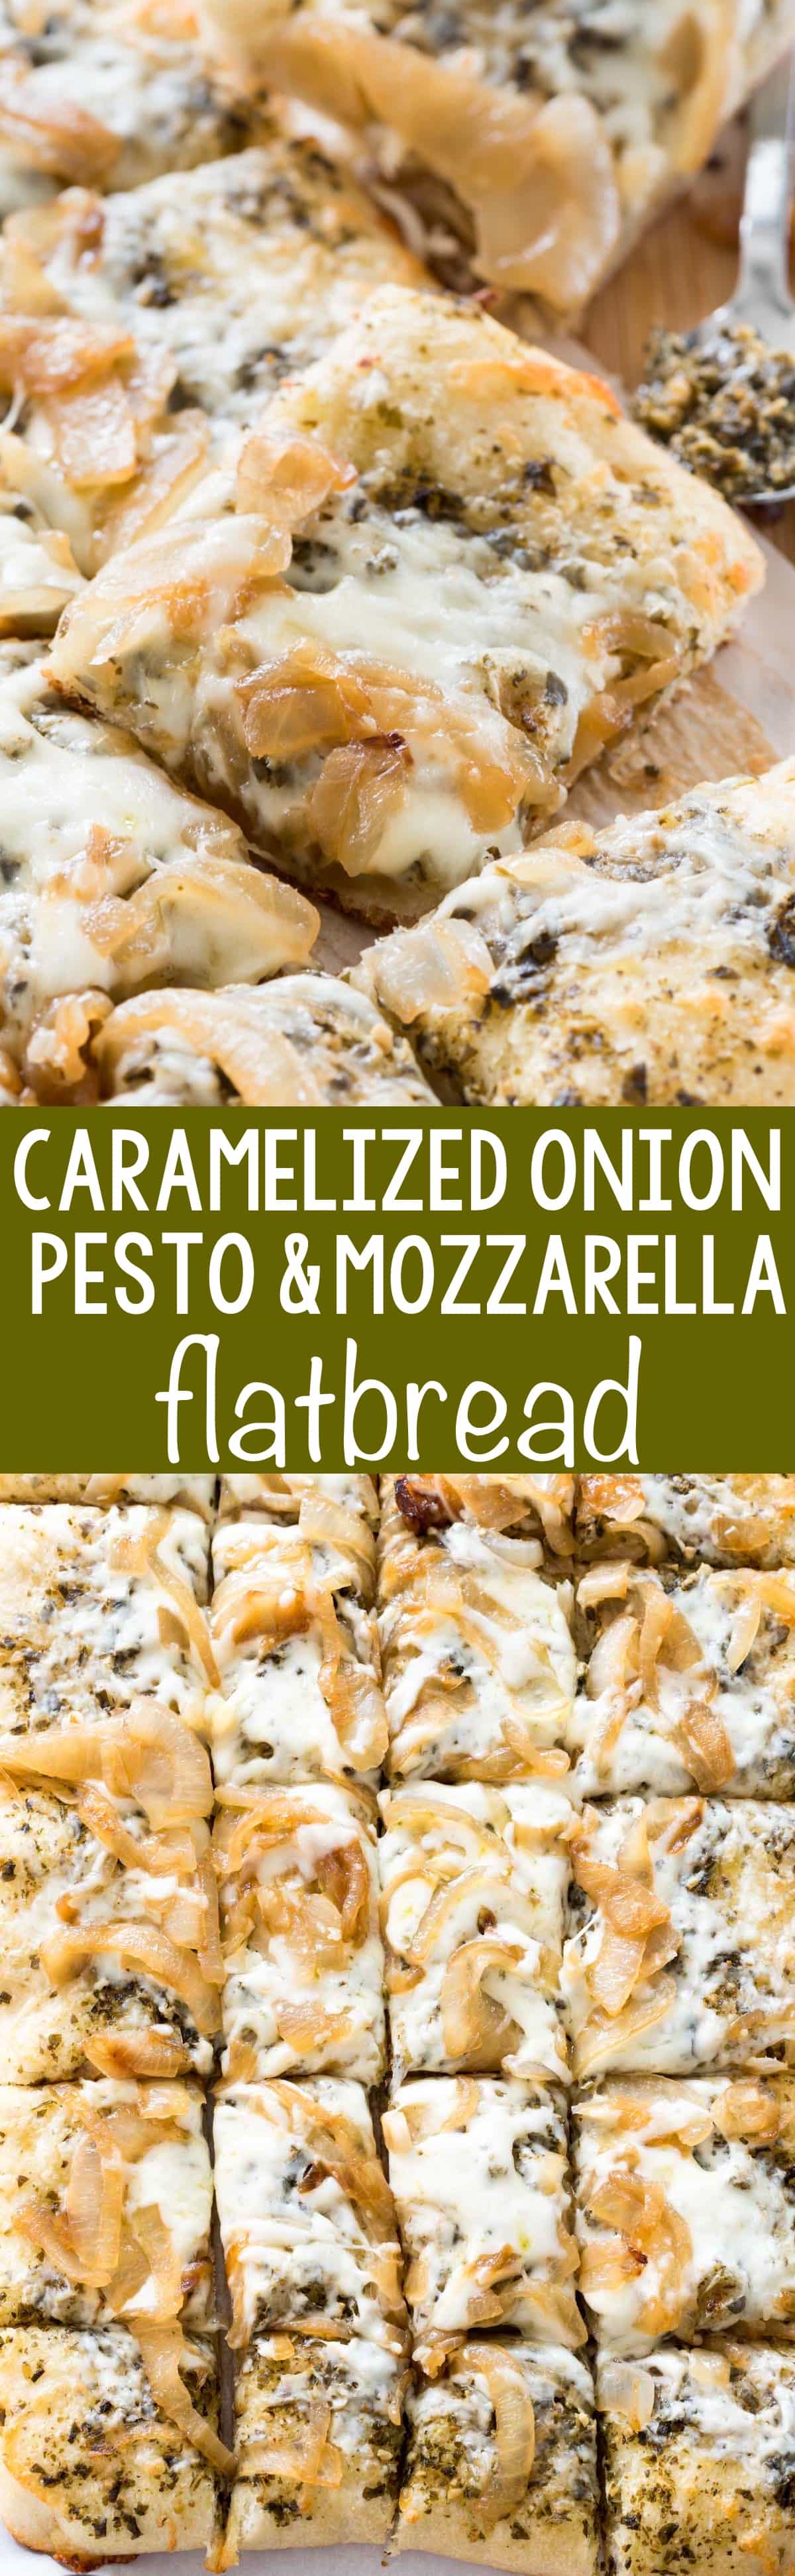 Caramelized Onion Pesto Flatbread - this EASY 4 ingredient pizza recipe is the perfect appetizer. Pesto, caramelized onions, and mozzarella baked onto a pizza crust - every time I make this people rave about it!